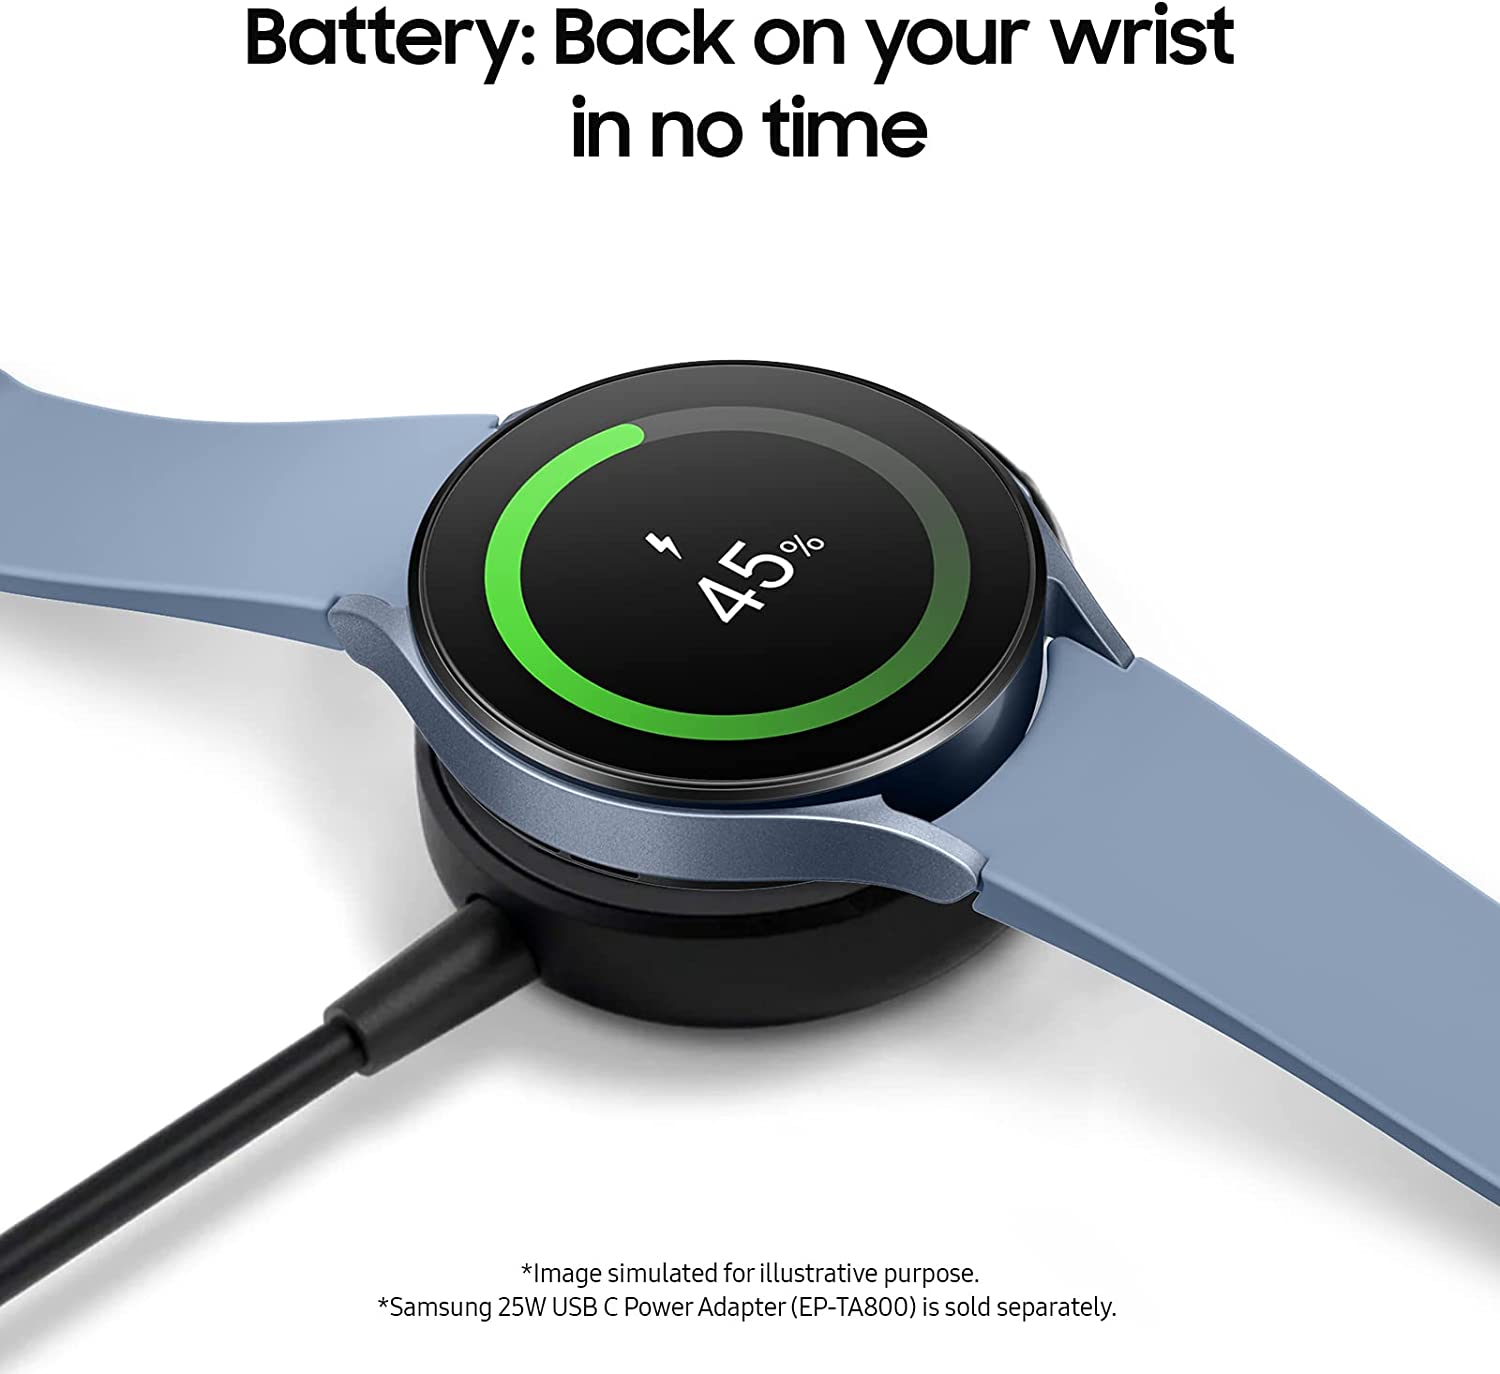 REVIEW OF THE SAMSUNG GALAXY WATCH 5: IT WOULD BE PERFECT IF THE BATTERY WERE BETTER